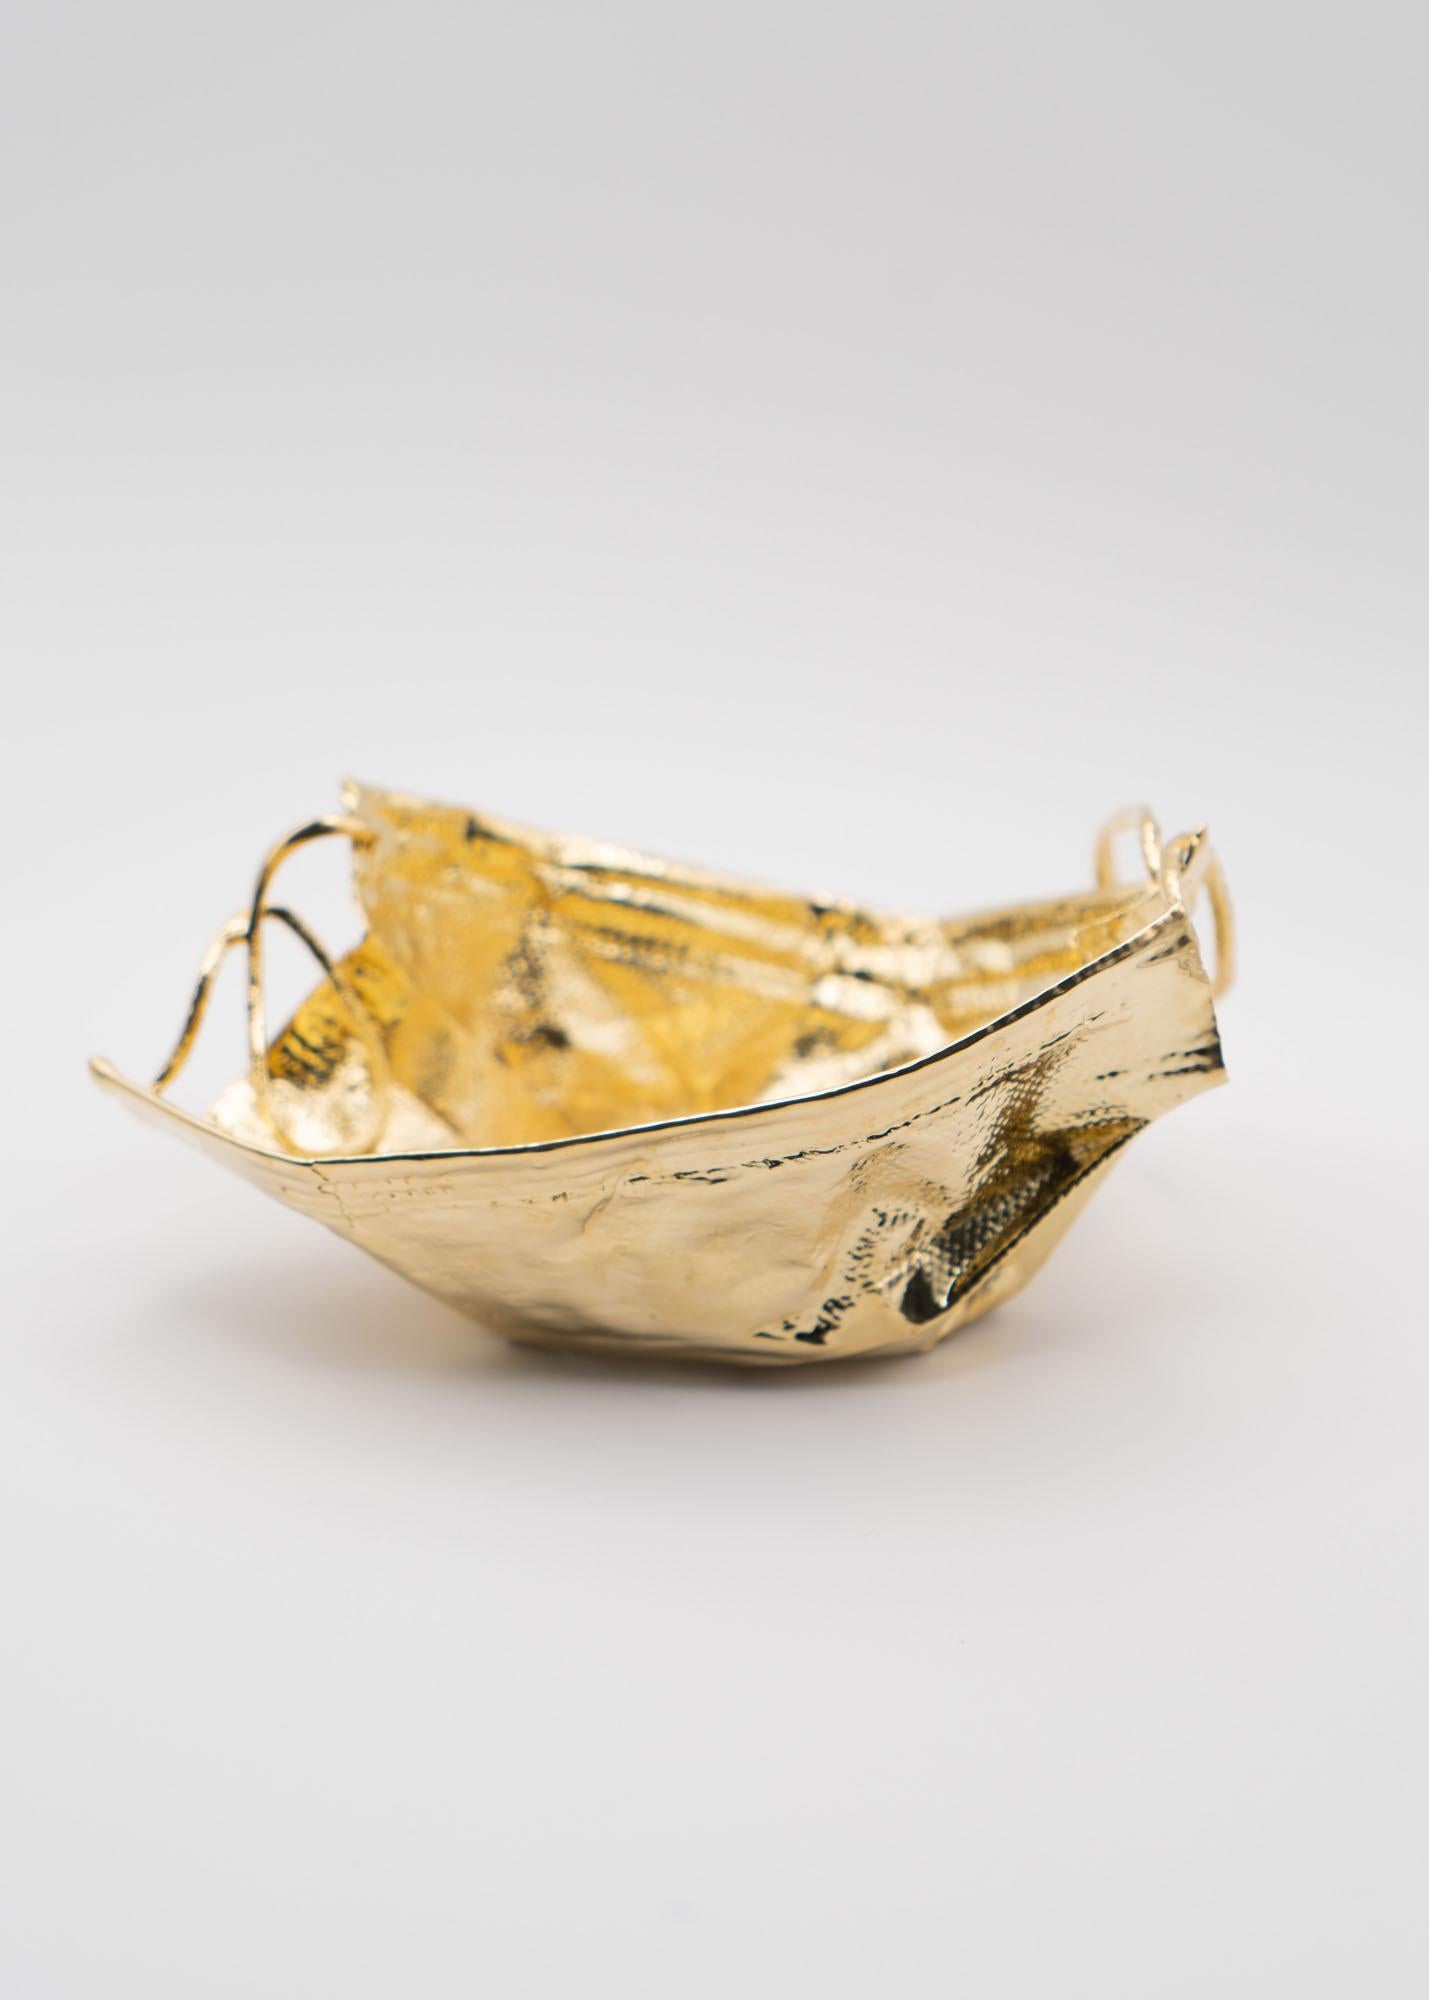 Remask Act 017 Gold Art Object Made from Surgical Mask by Enrico Girotti In New Condition For Sale In Verona, IT